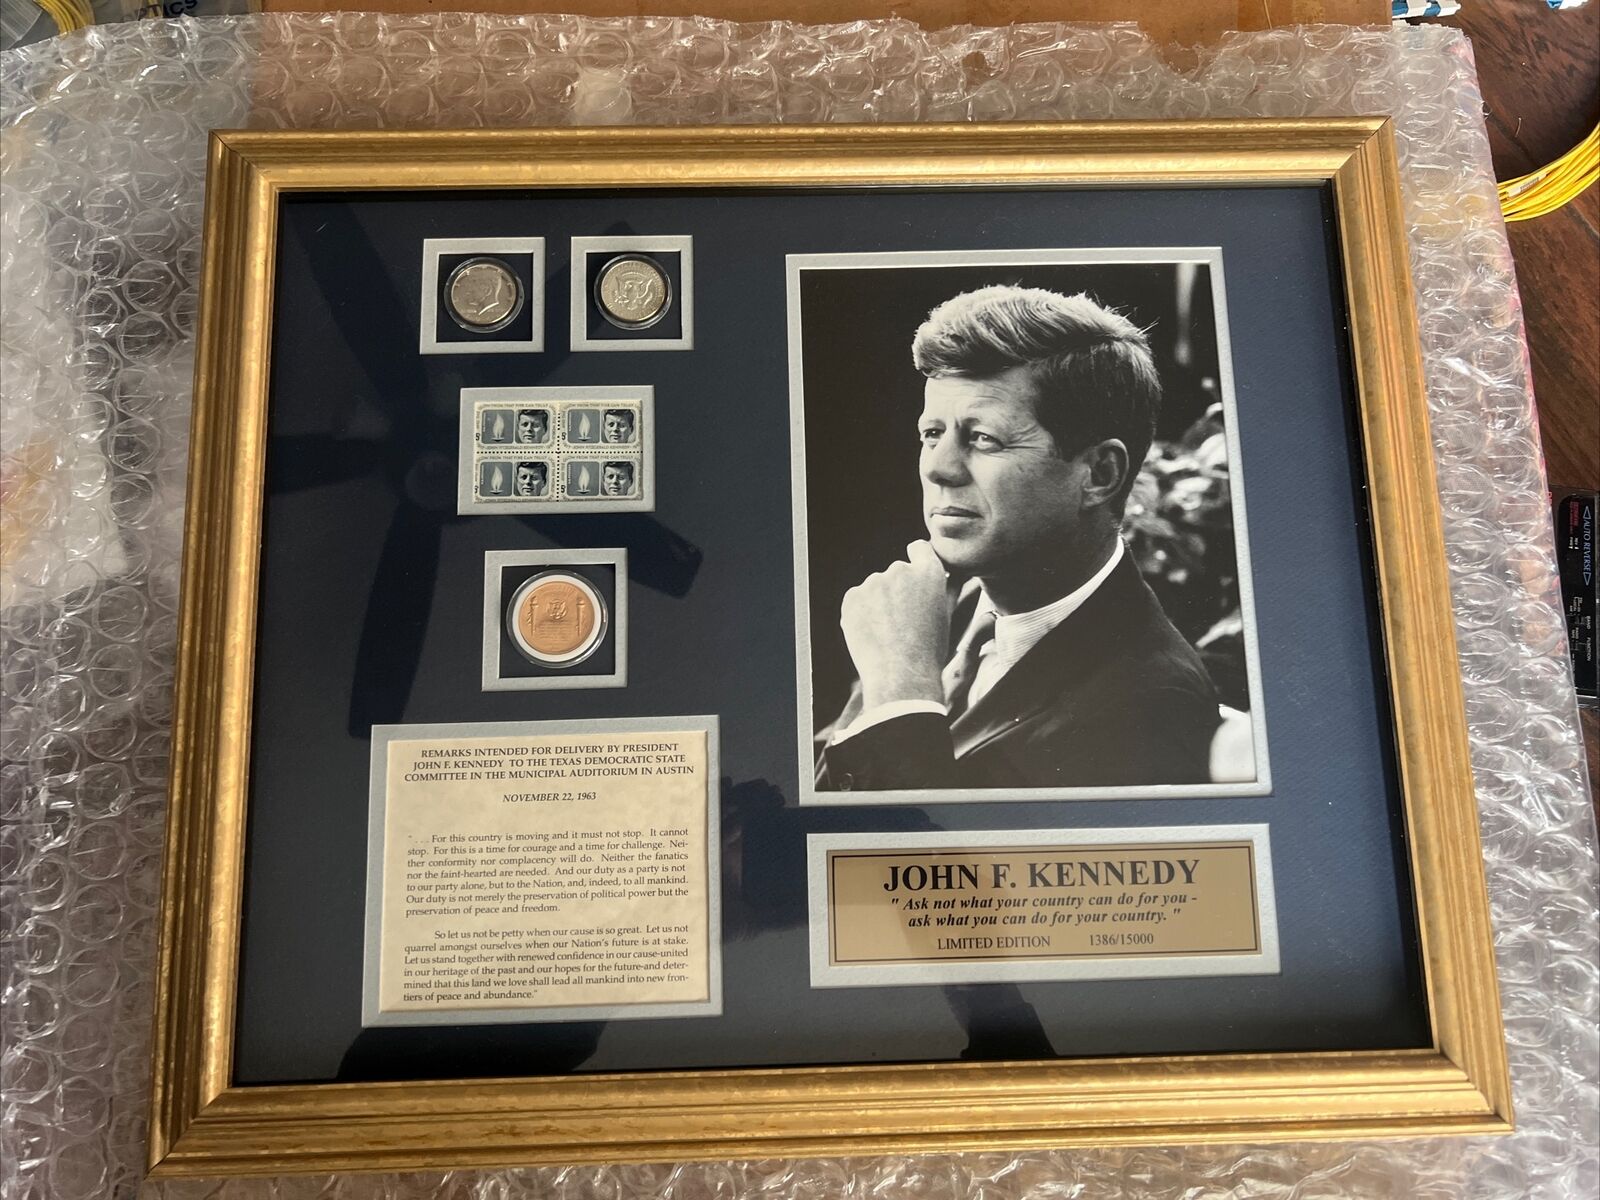 Limited Edition President John F. Kennedy Silver Coins - Stamps And More Picture